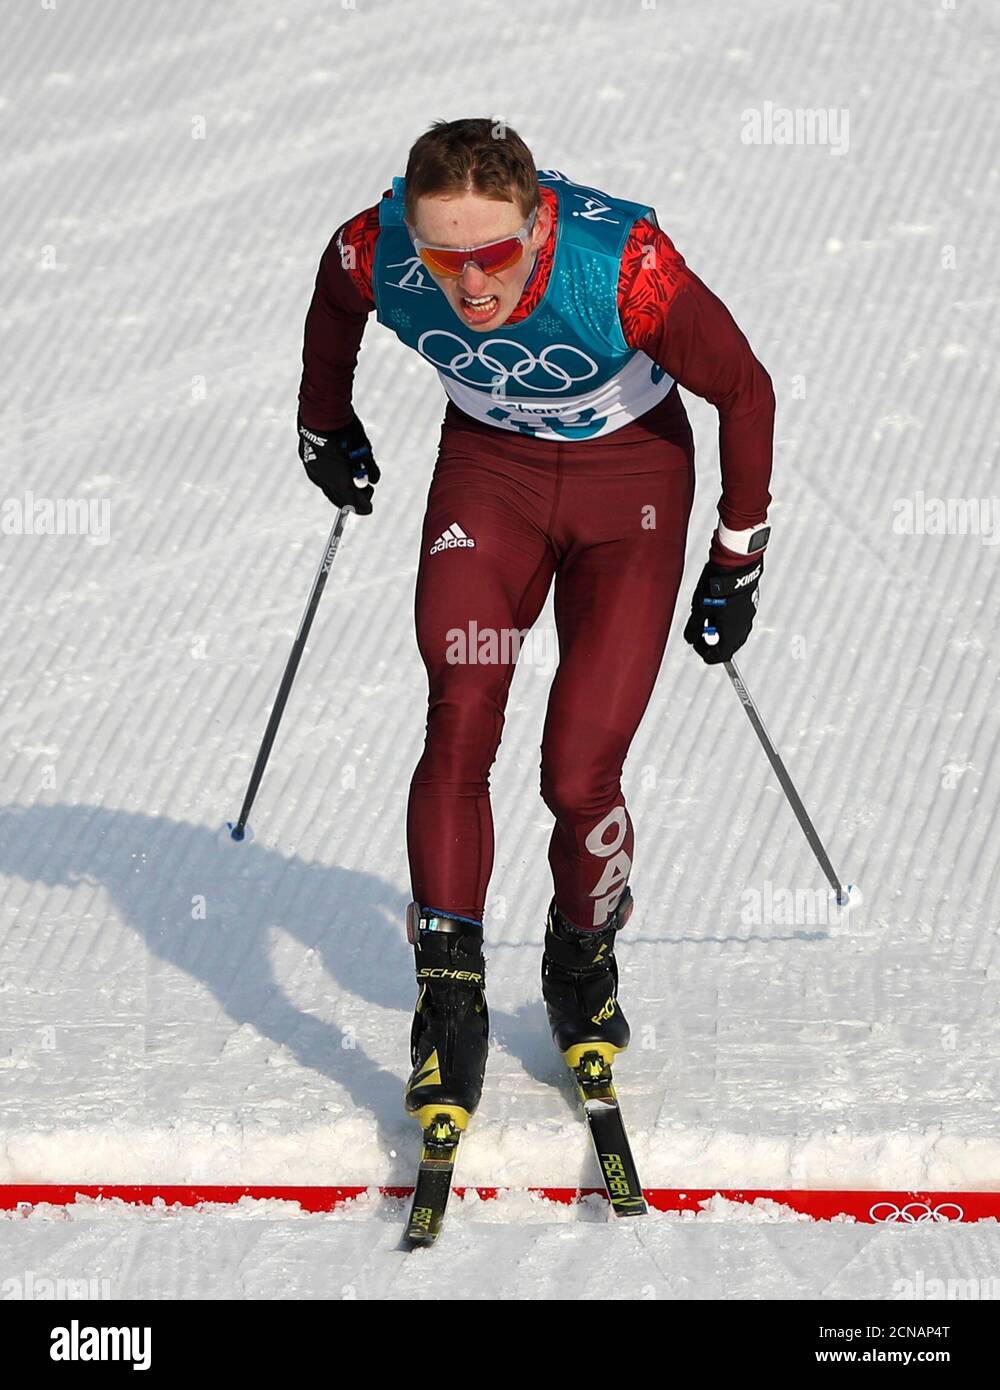 Cross-Country Skiing – Pyeongchang 2018 Winter Olympics – Men's 15km Free – Alpensia Cross-Country Skiing Centre – Pyeongchang, South Korea – February 16, 2018 - Denis Spitsov, an Olympic athlete from Russia, crosses the finish line. REUTERS/Murad Sezer Stock Photo